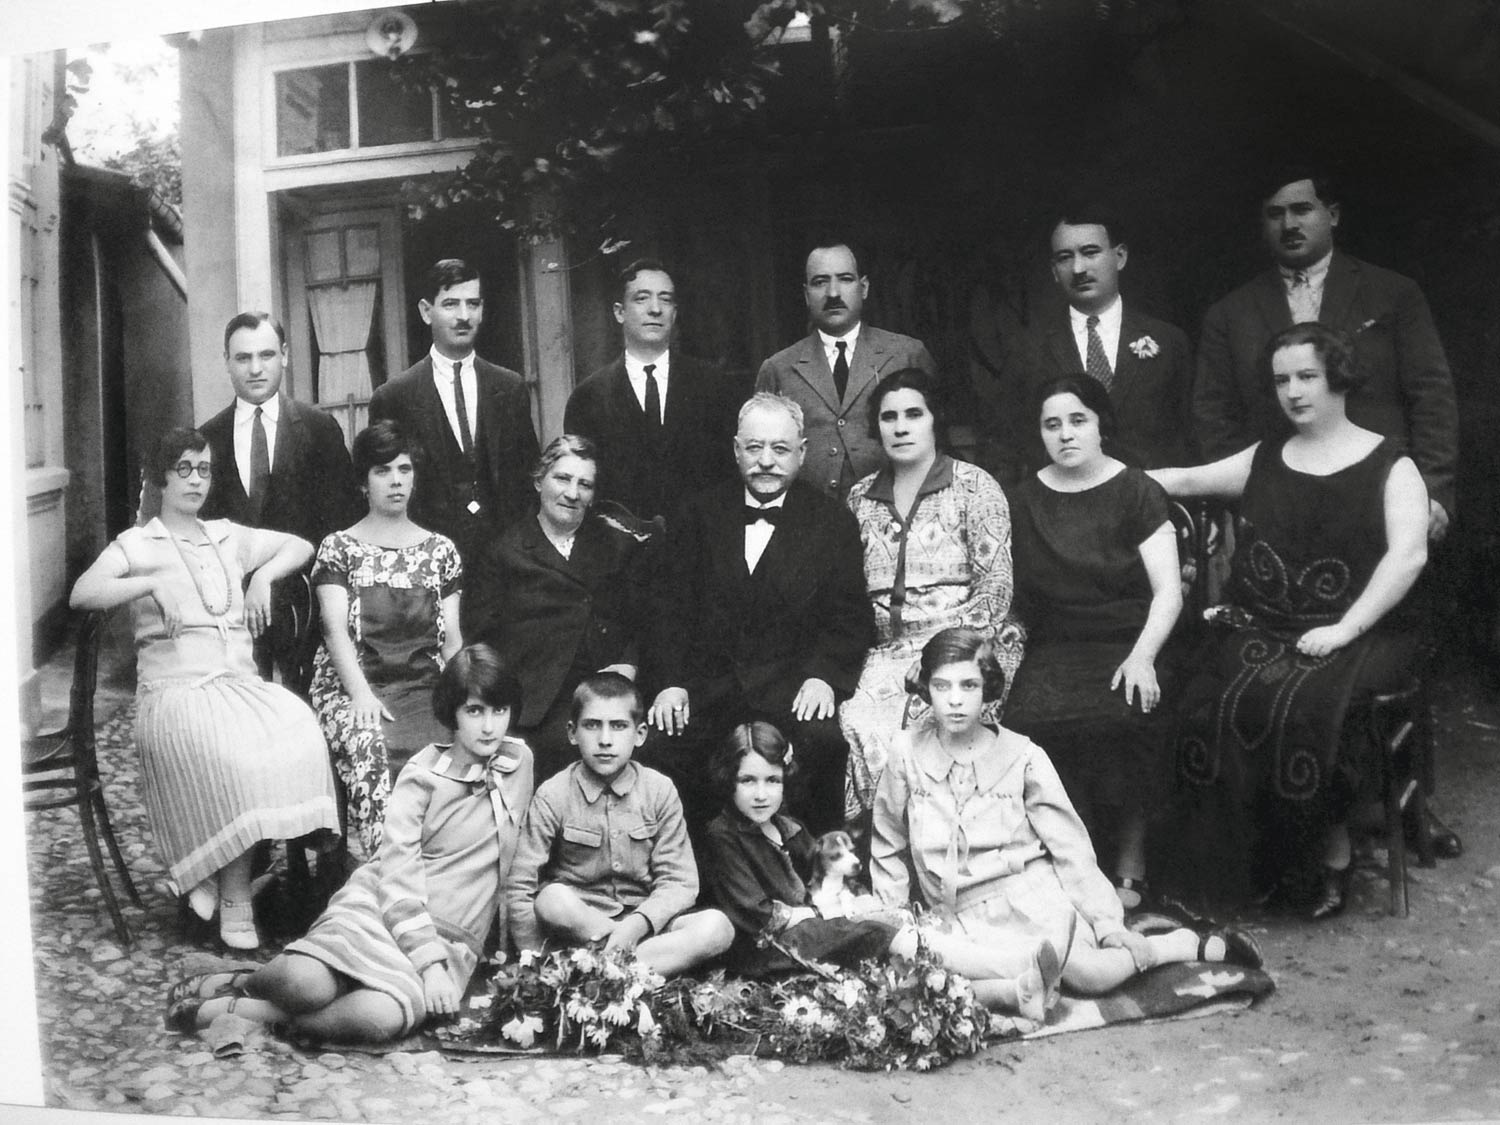 The Romanian Steinbergs with visiting American relatives, Buzău, 1925. Moritz Steinberg is in the top row, second from right, with his brothers and brother-in-law. Rosa Steinberg is seated, third from right; Clara and Nachman Steinberg to the left of her. Seated on the ground: Henrietta Steinberg, an American cousin, Saul, Gertrude Steinberg, an American cousin, and Lica Steinberg.